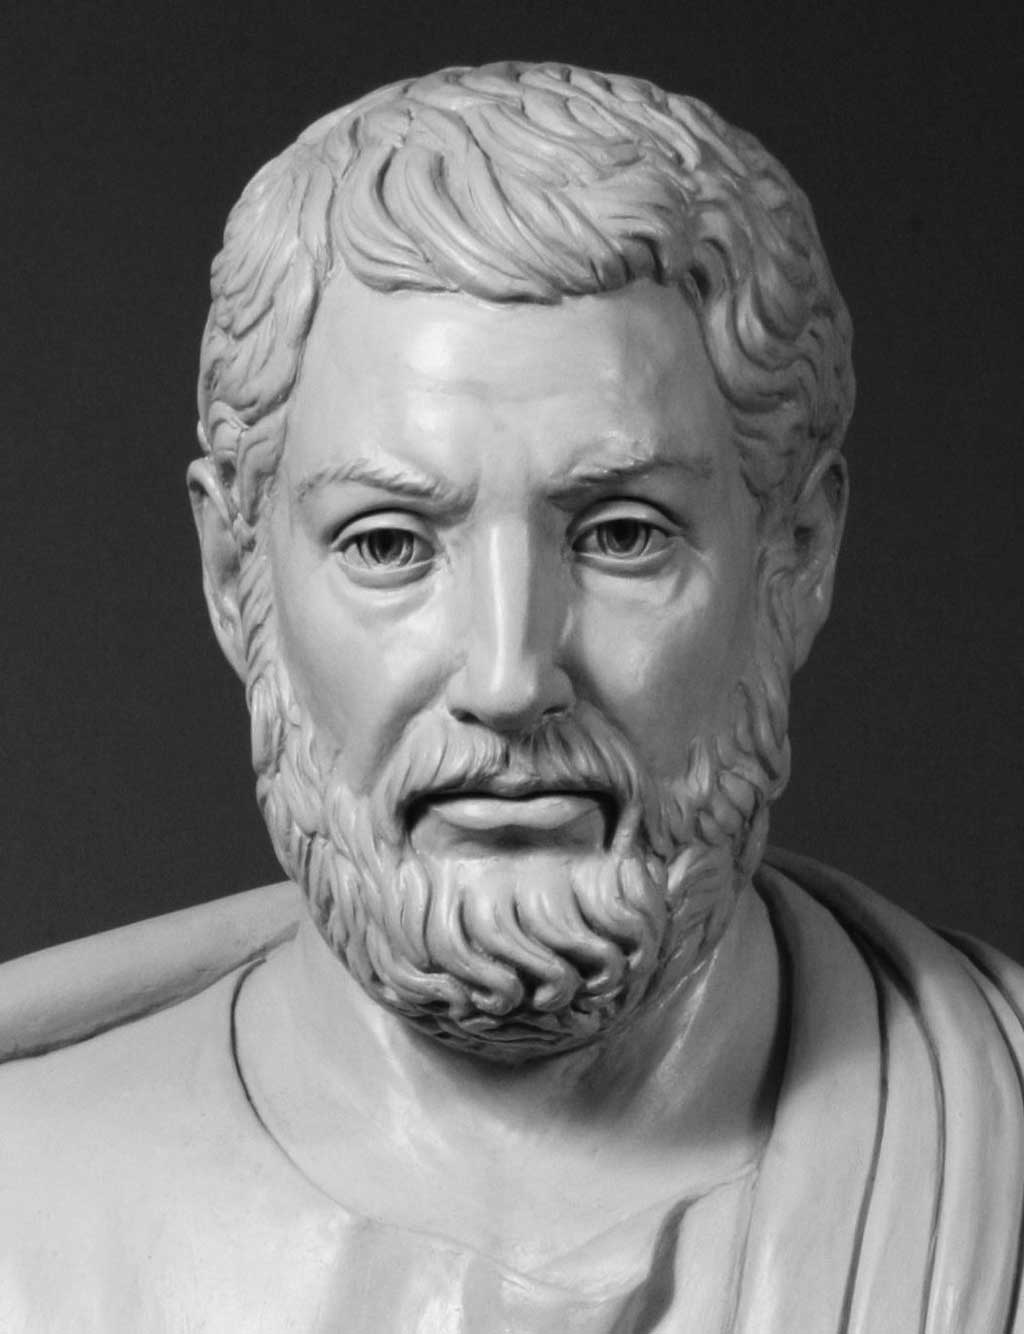 Modern bust of Cleisthenes, known as 'the father of Athenian democracy,' on view at the Ohio Statehouse, Columbus, Ohio. Cleisthenes, the father of Greek democracy, reformed traditional Athenian government controlled by ruling tribes into the first government 'of the people' (a demos, or democracy).